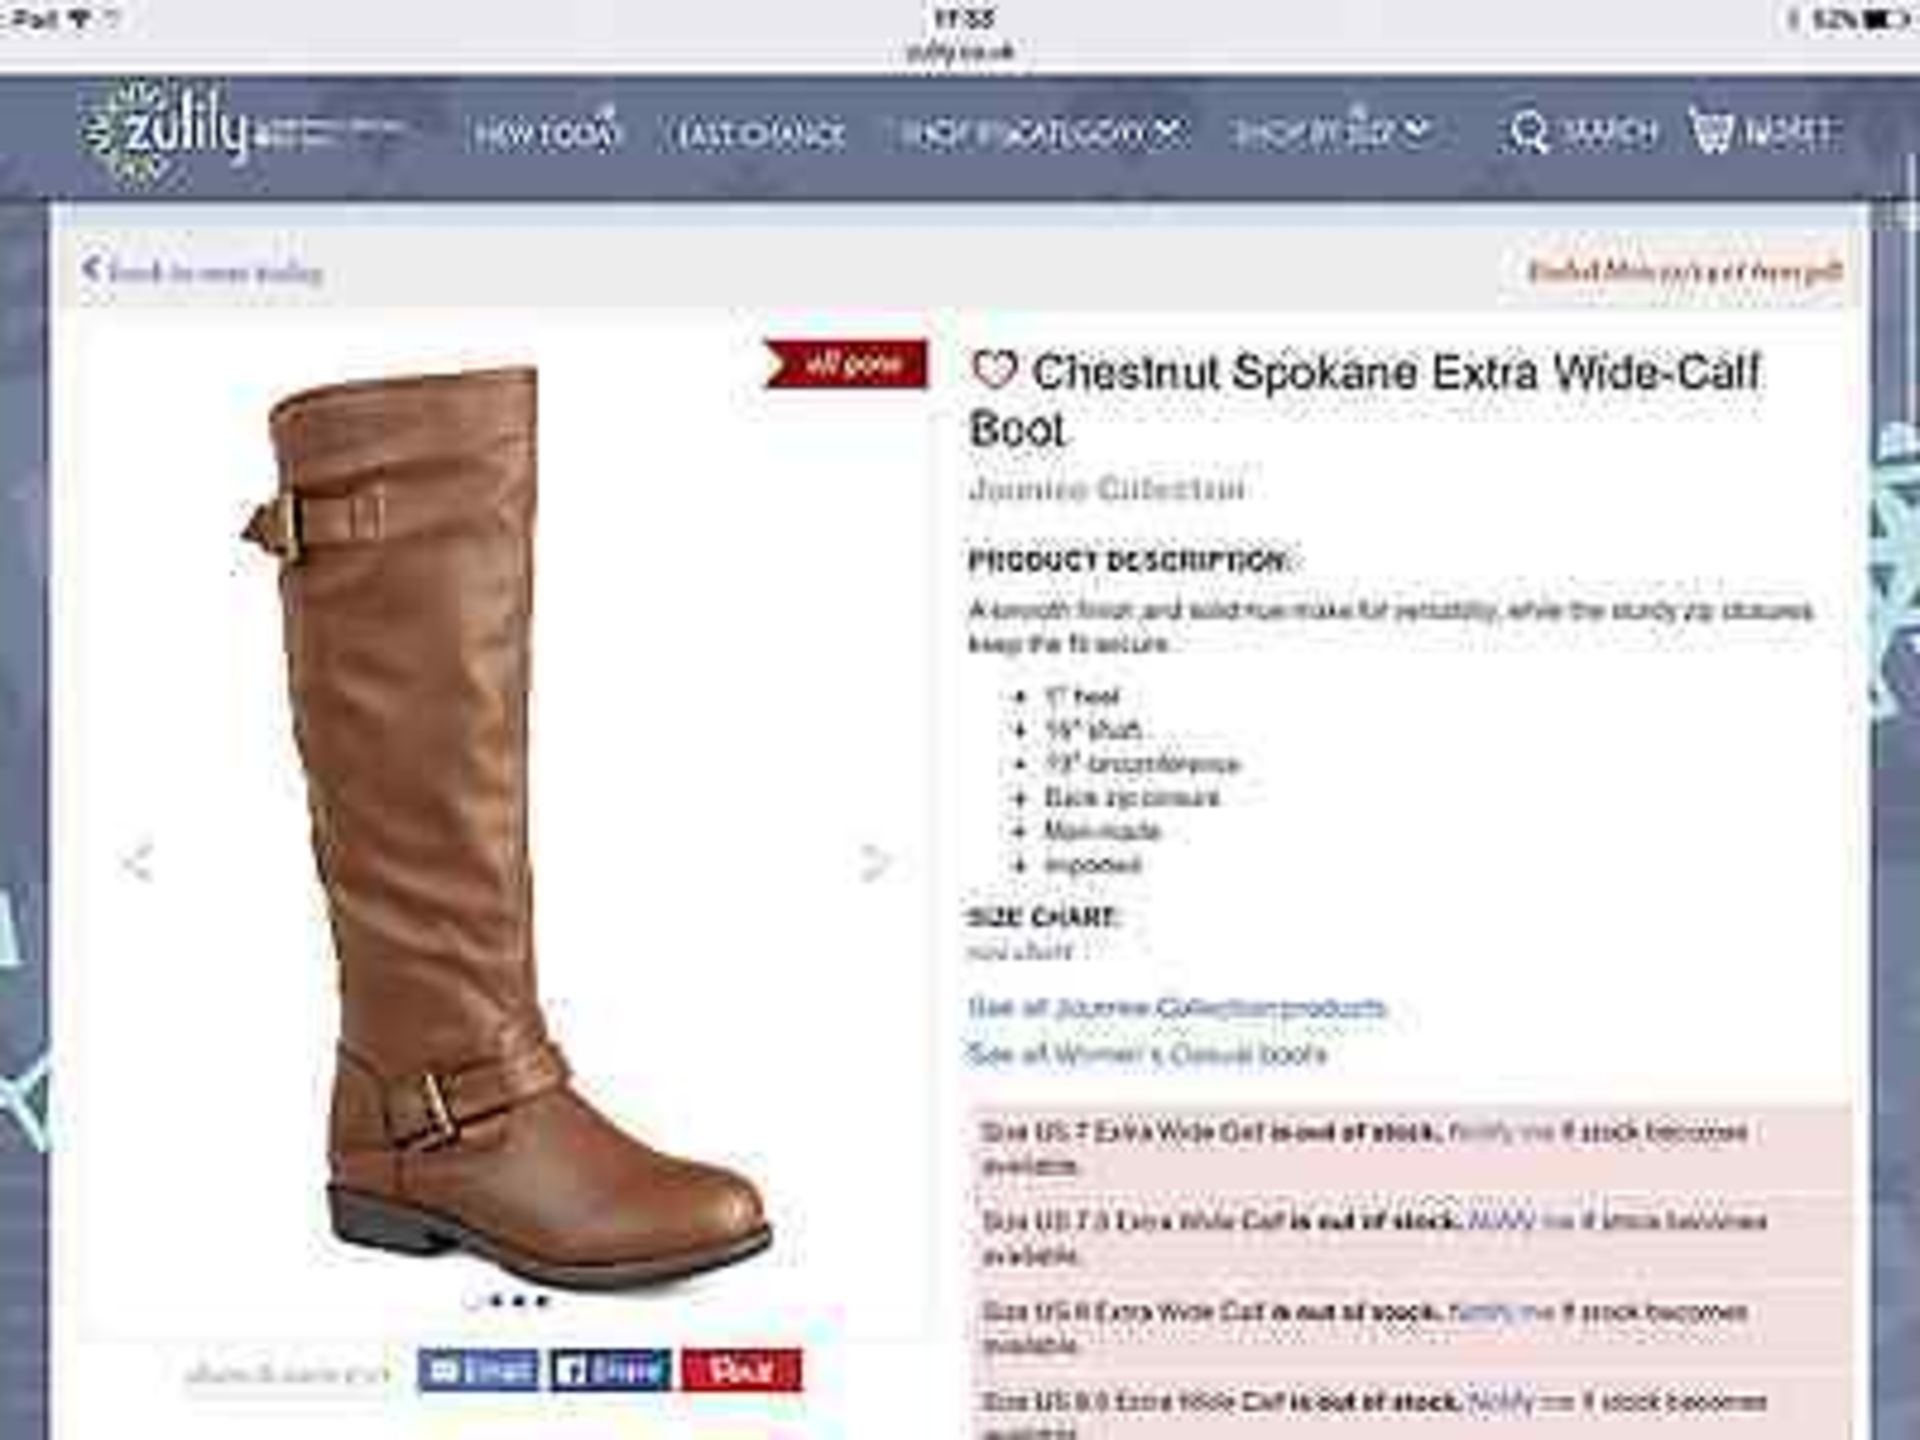 Journee Collection Chestnut Spokane Extra-Wide Calf Boot, Size Eur 39.5 (New with box) - Image 5 of 6